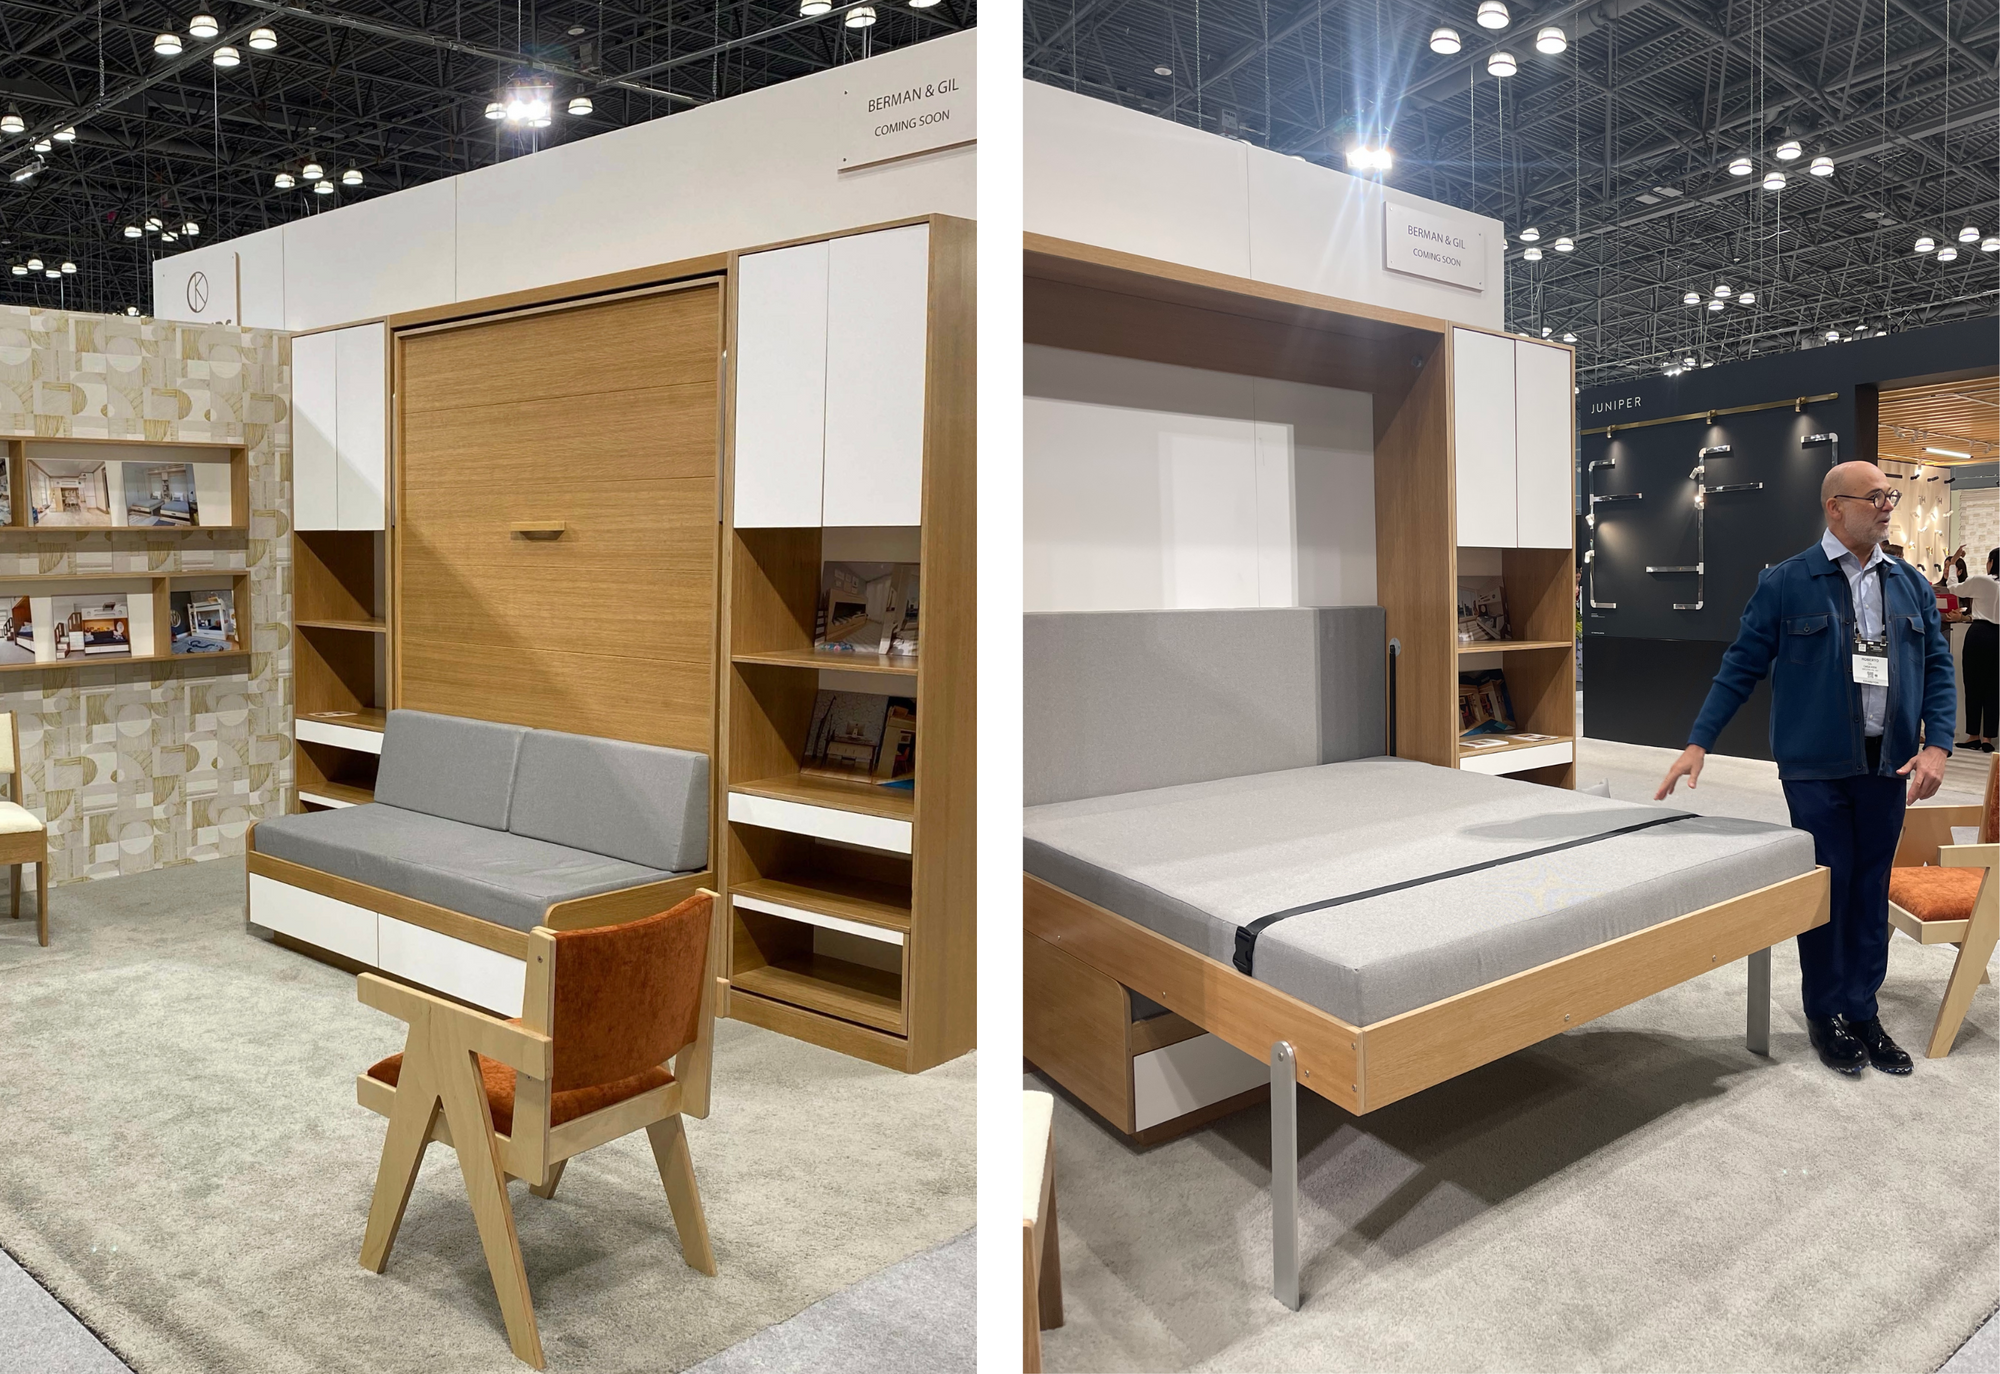 Split image of a convertible murphy bed at a trade show, sofa mode and bed mode, with an attendant.